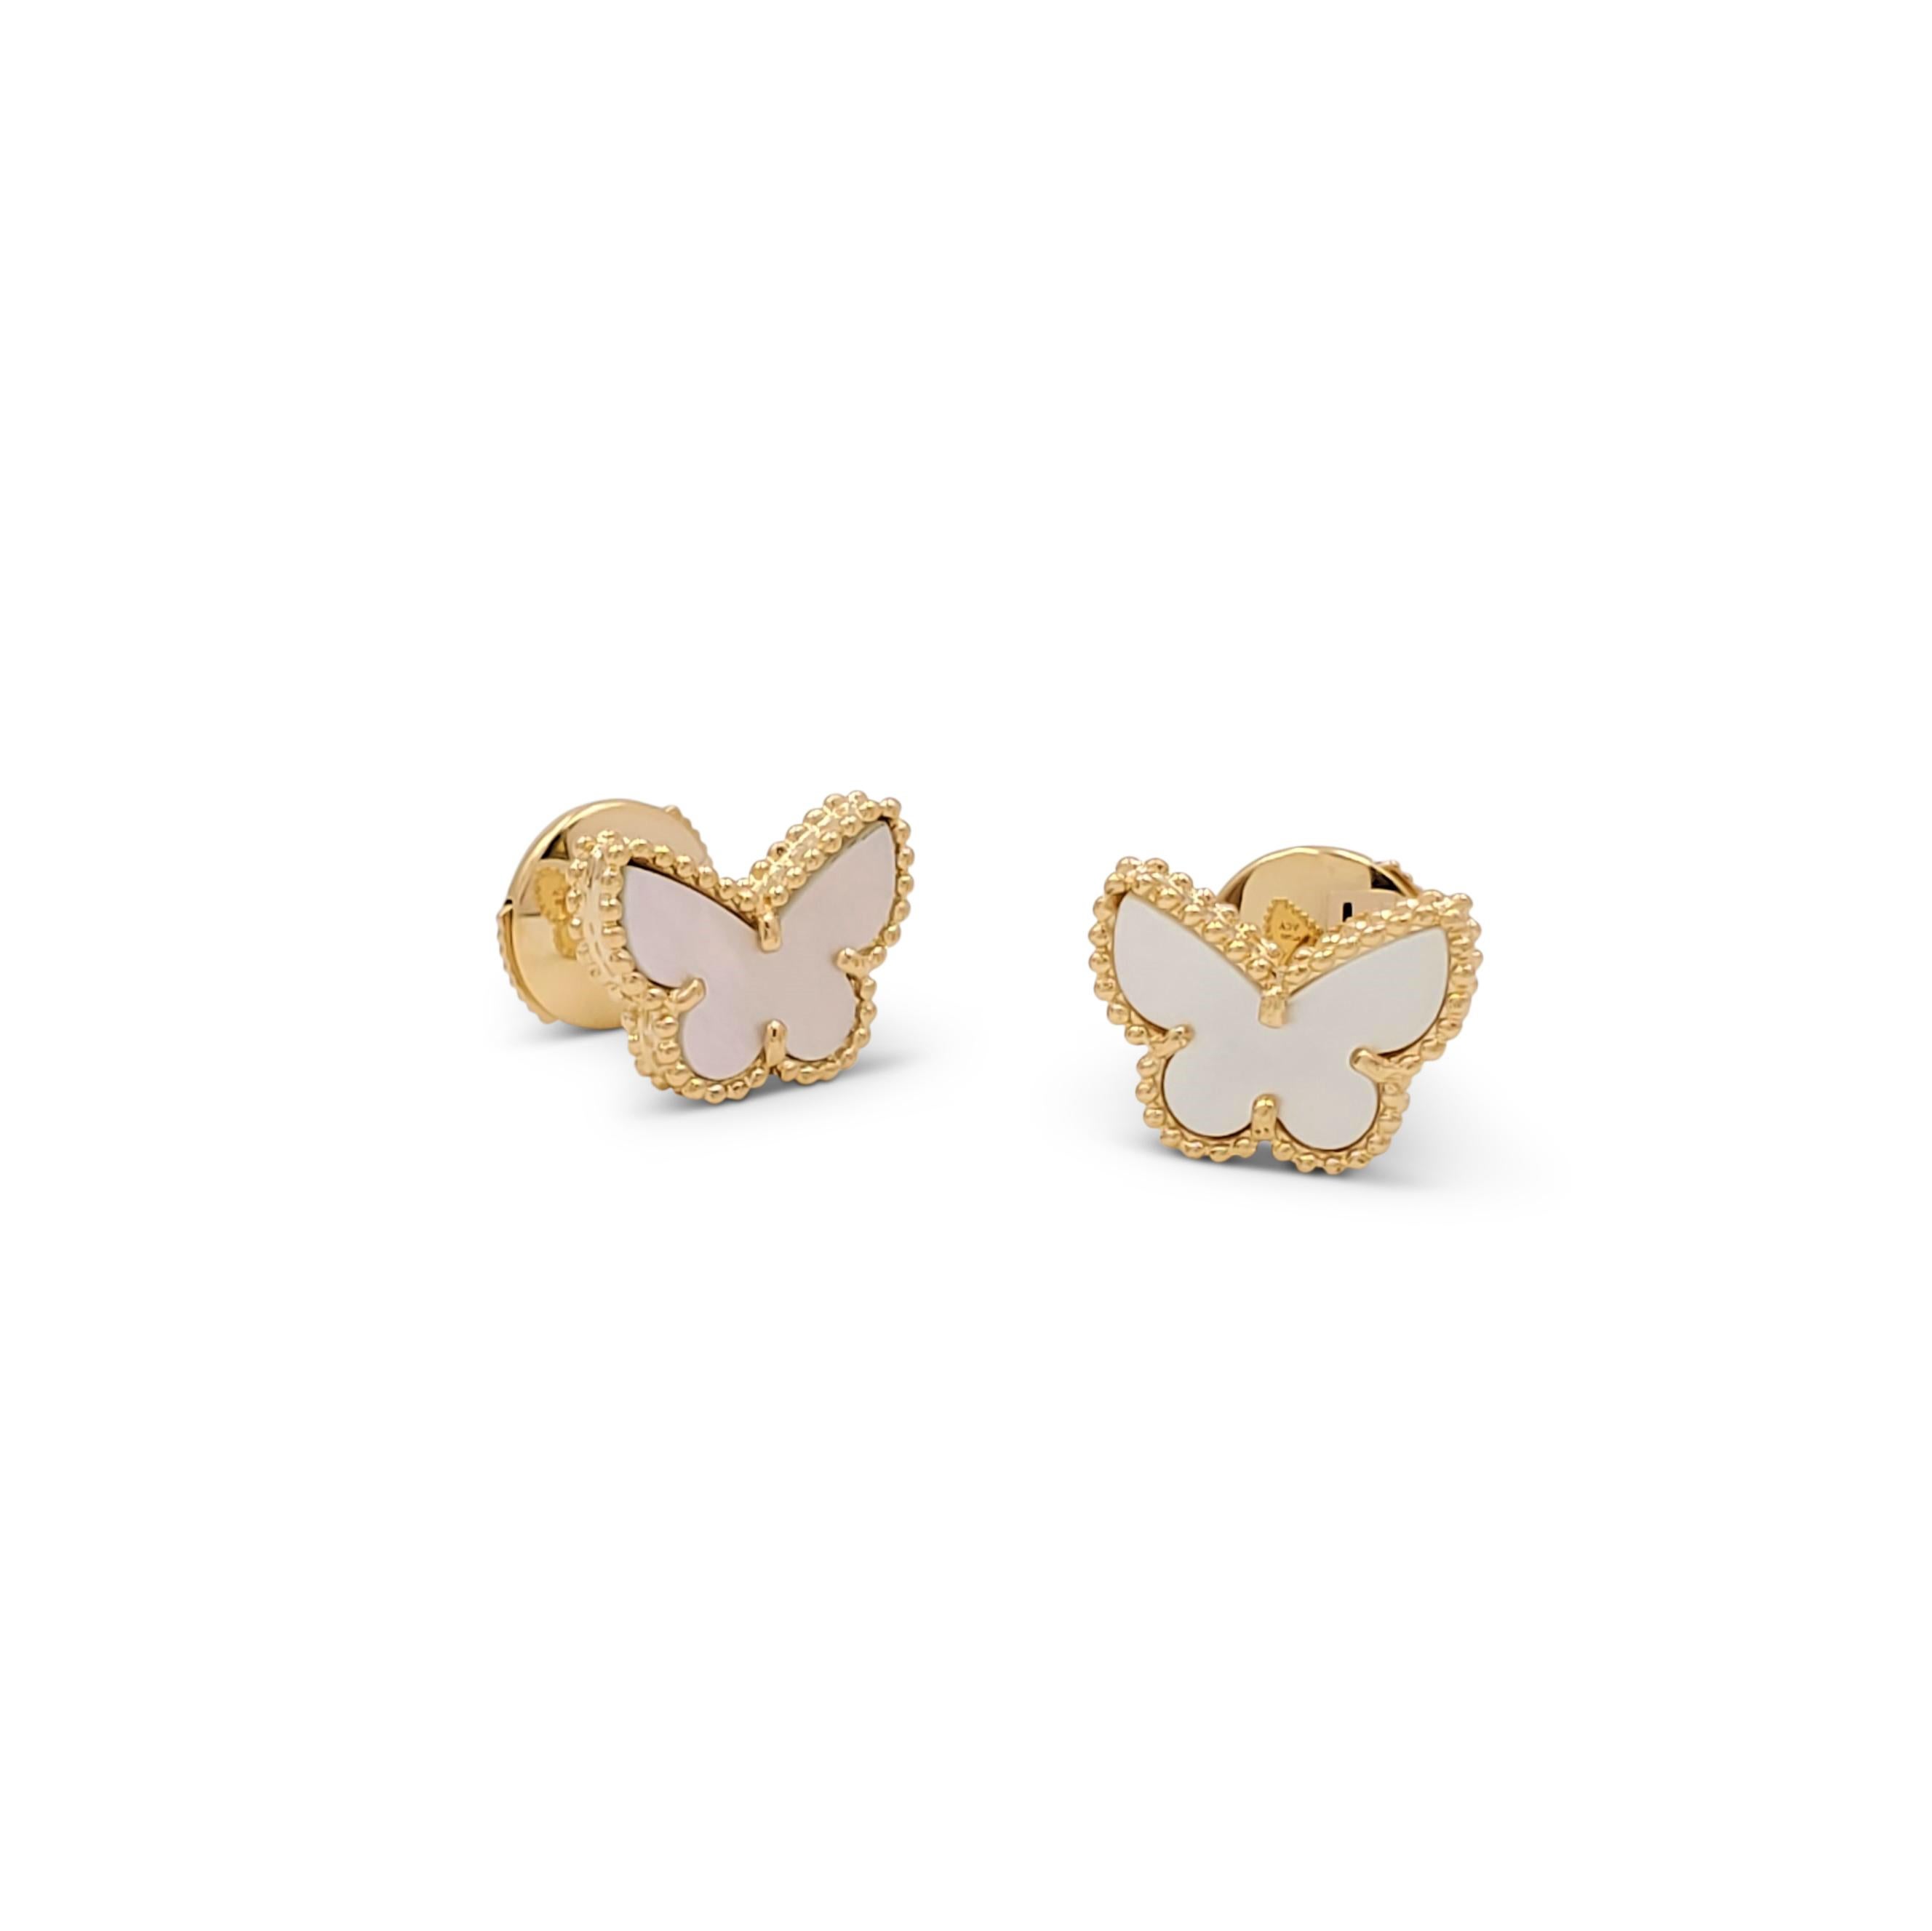 Authentic Van Cleef & Arpels 'Sweet Alhambra' earrings crafted in 18 karat yellow gold center on a pair of mother-of-pearl butterfly motifs. Signed VCA, Au750, with serial number. The earrings are presented with the original papers, no box. CIRCA